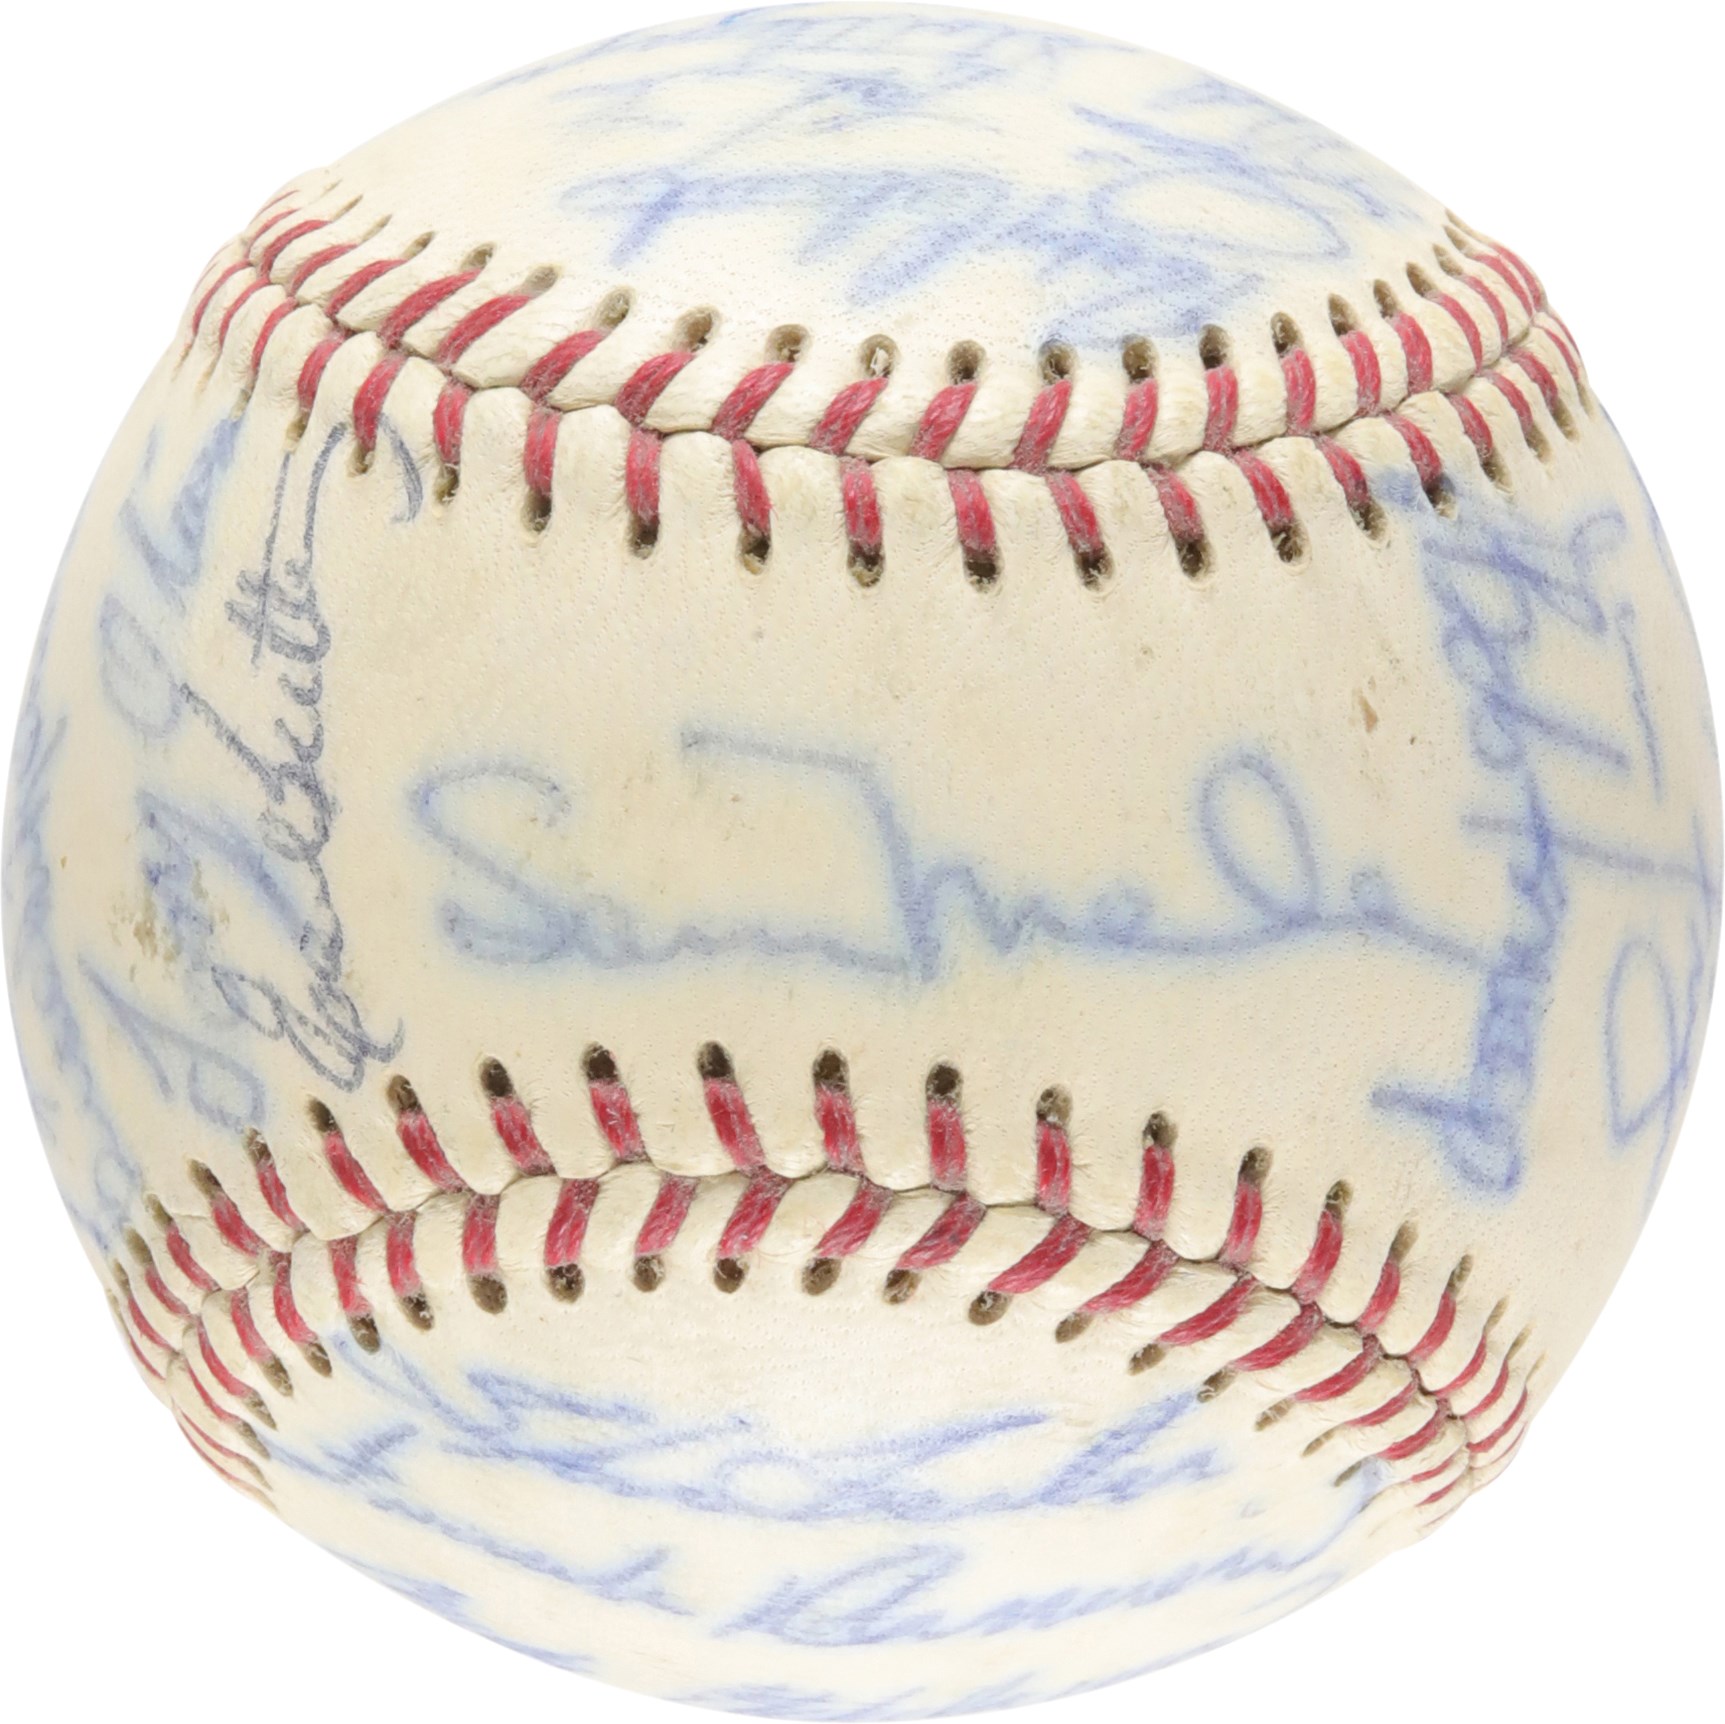 - 1966 American League All-Star Team-Signed Baseball (ex-Al Kaline Collection)